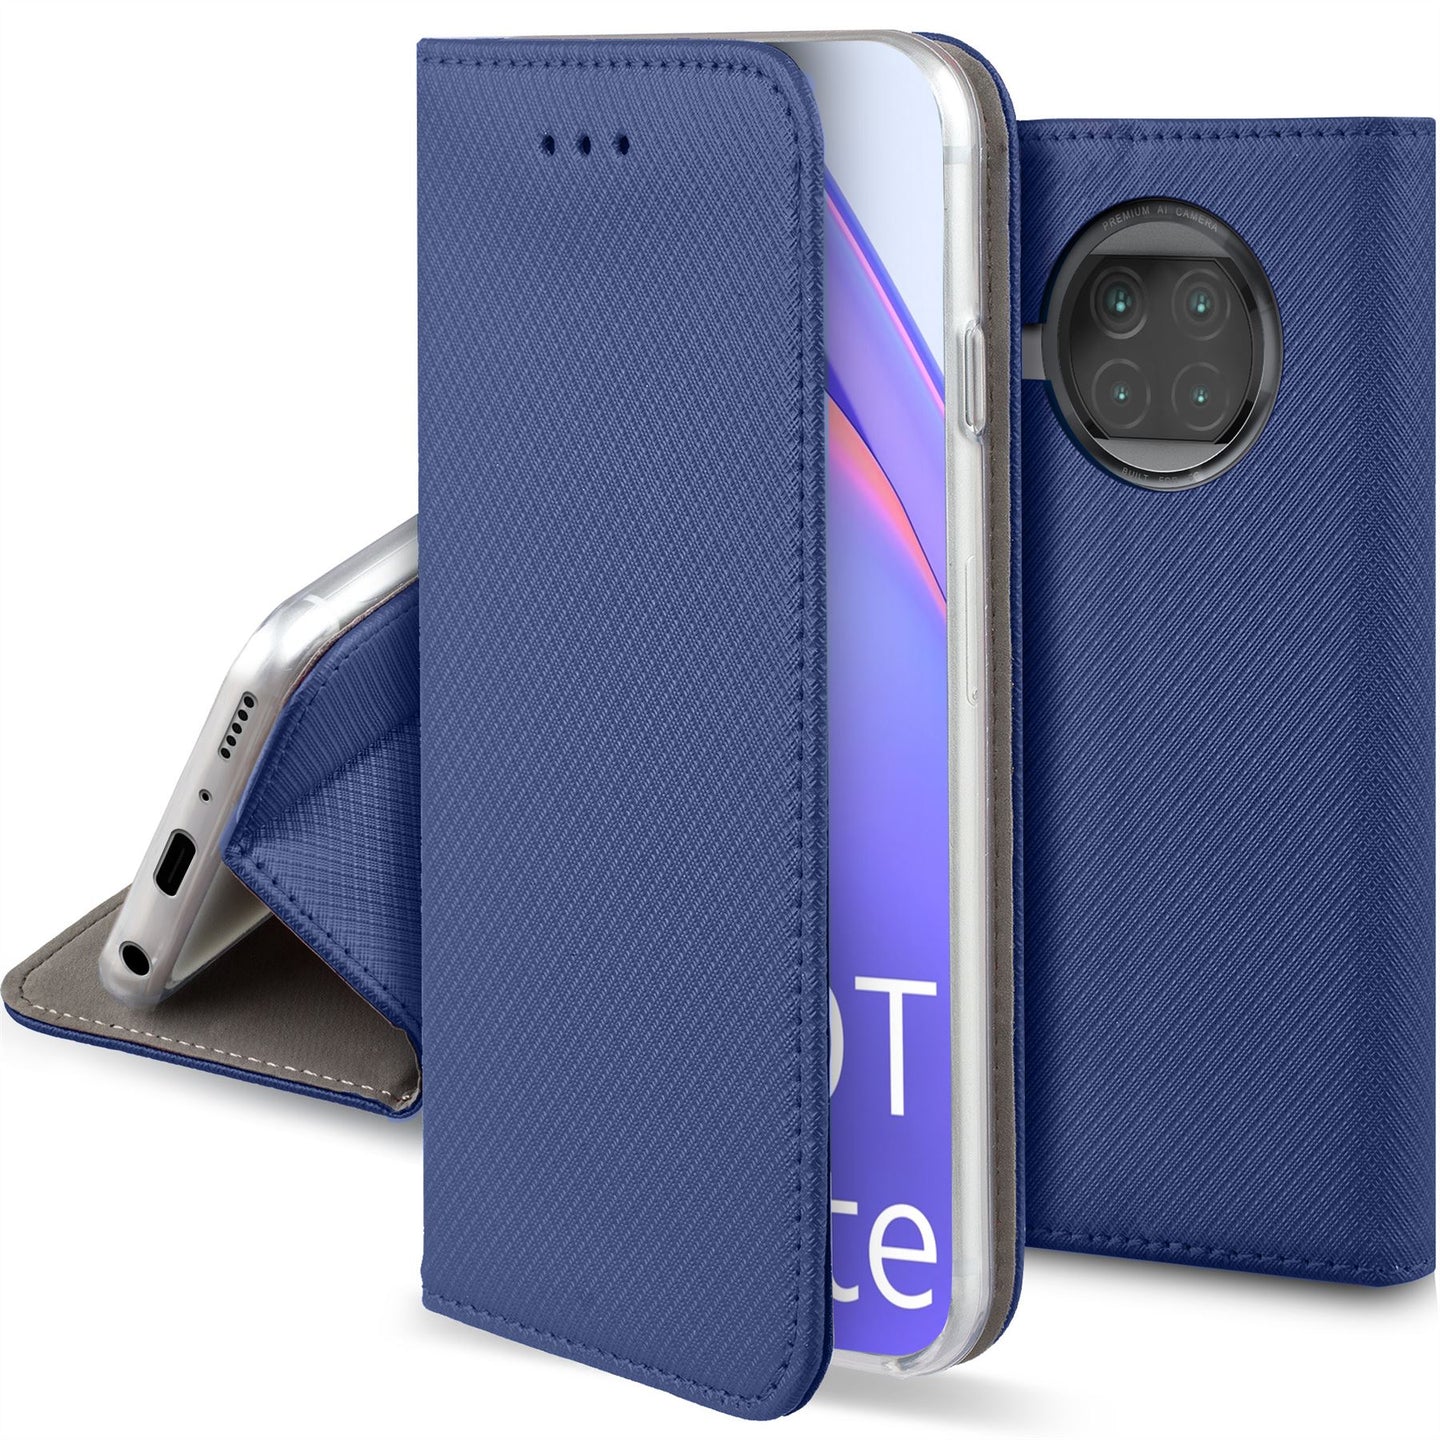 Moozy Case Flip Cover for Xiaomi Mi 10T Lite 5G, Dark Blue - Smart Magnetic Flip Case with Card Holder and Stand